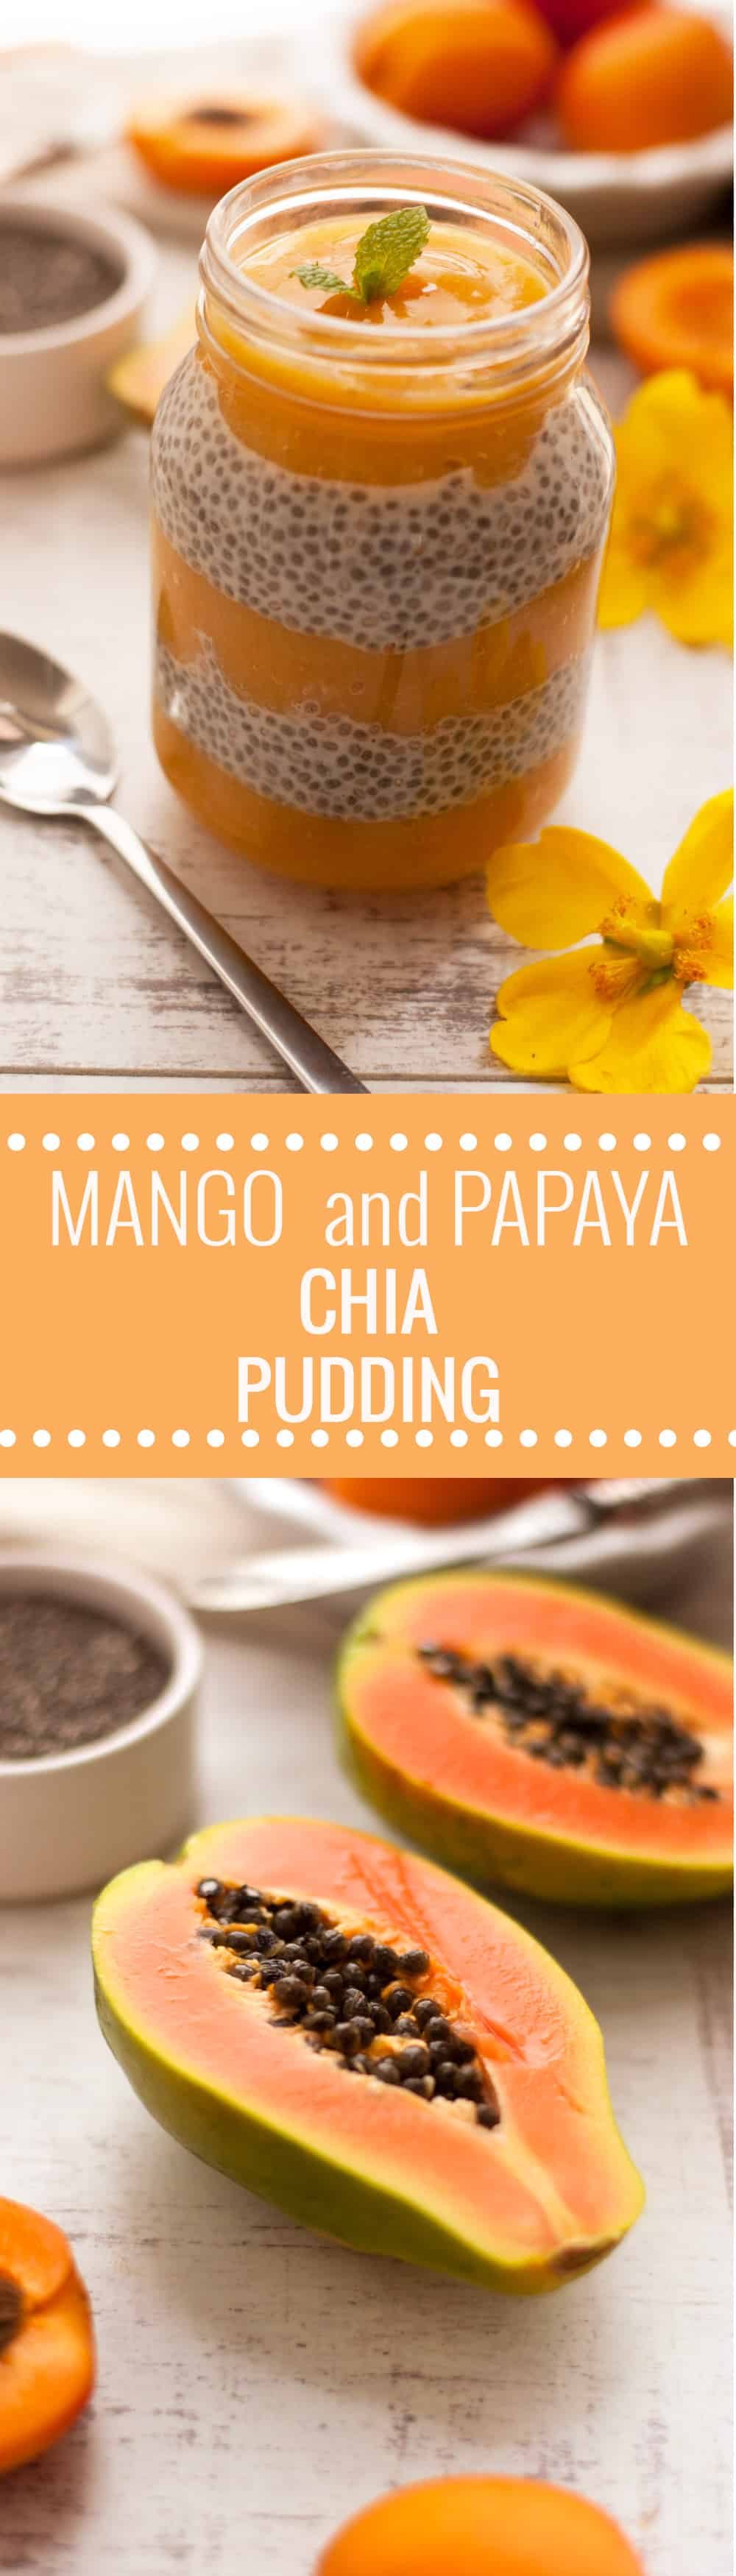 Delicious Mango, Papaya and Apricot Chia Pudding infused with Ginger. Healthy and super nutritious breakfast packed with exotic flavors!